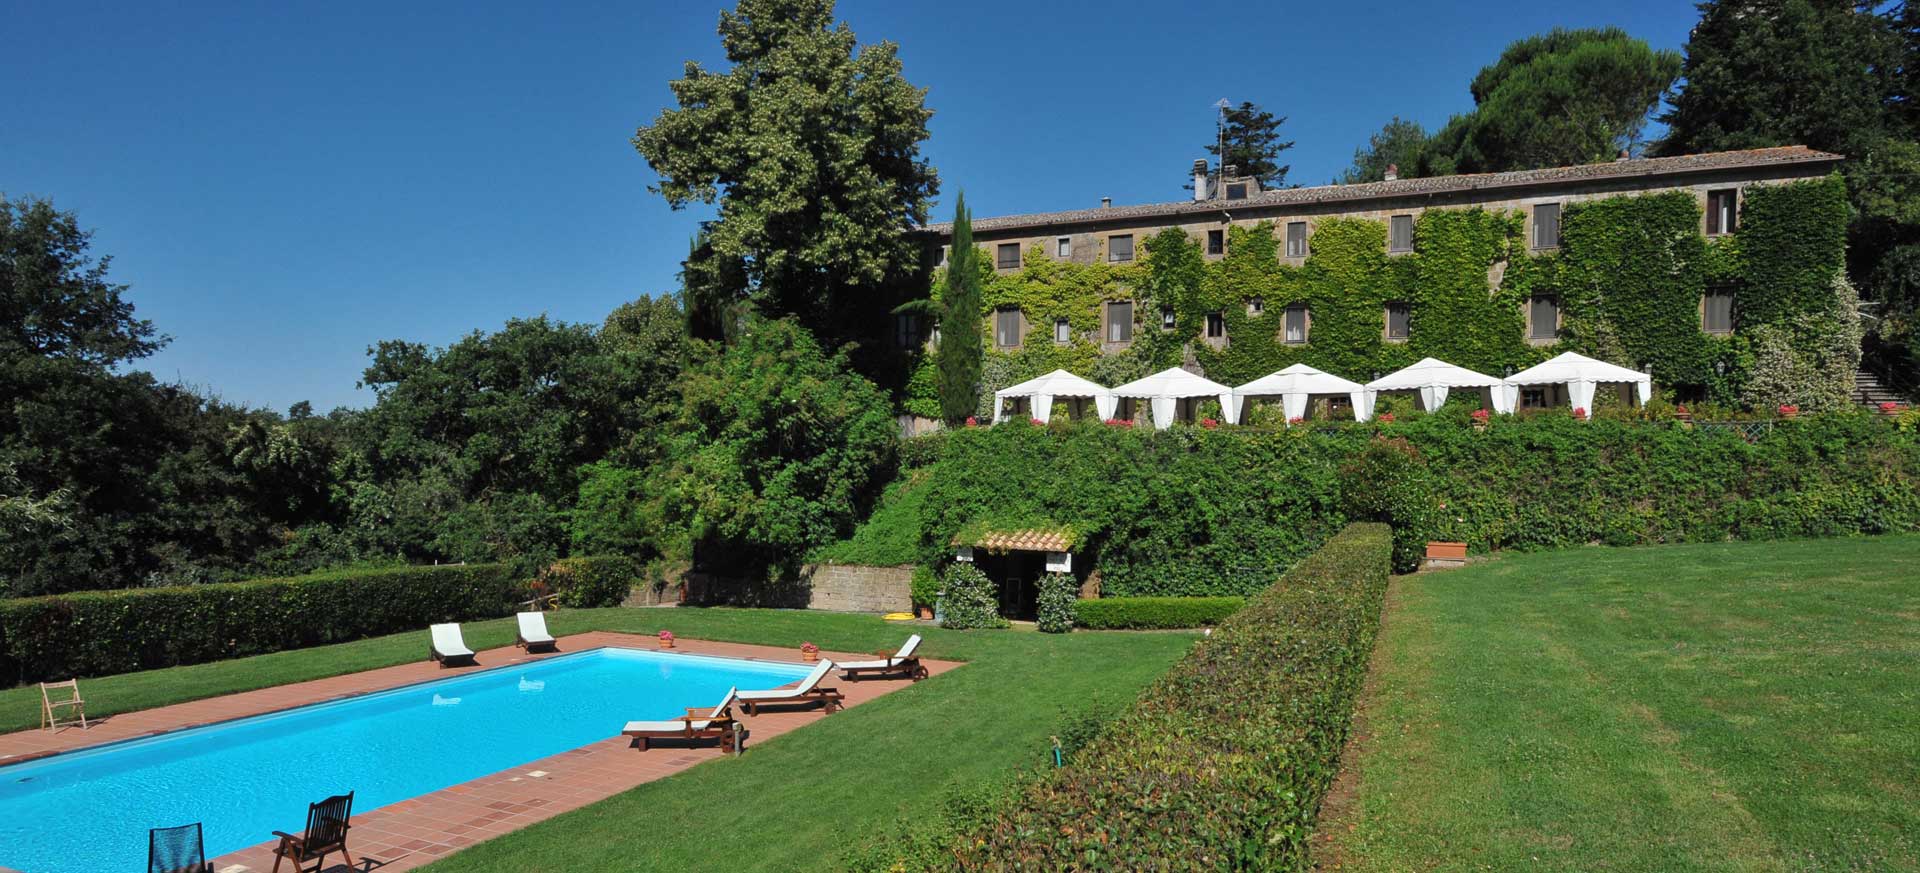 Rome & Lazio: Tailor made holidays in small luxury and authentic hotels ...